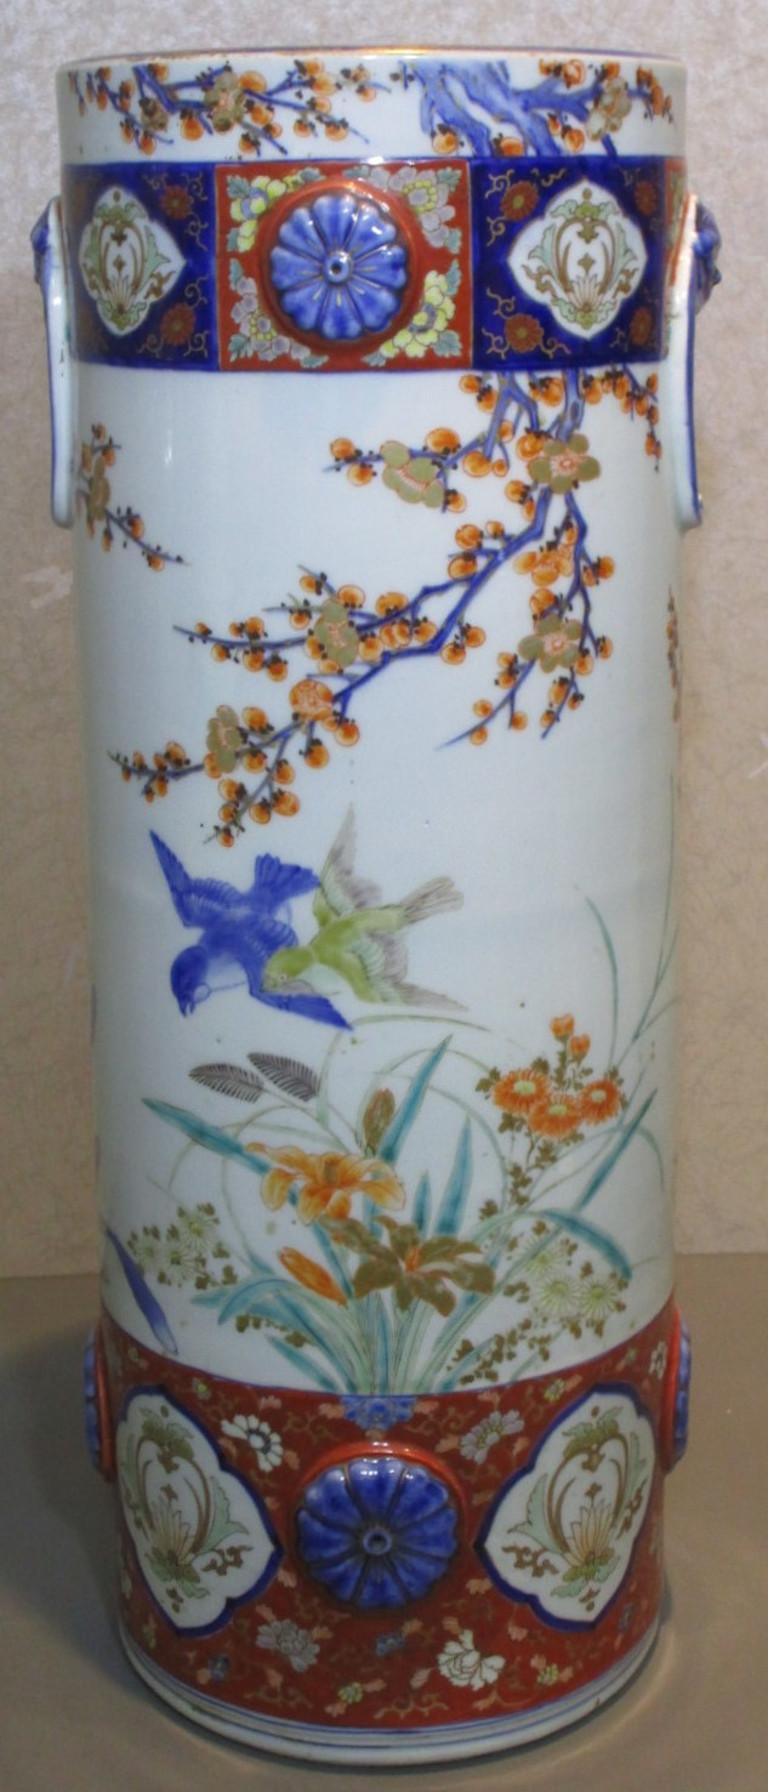 Exceptional Japanese tall Fukagawa Meiji period Imari porcelain vase in iron-red, cobalt blue and green on a stunningly shaped porcelain body. Fukagawa Eizaemon started the Koransha (Scented Orchid) company in 1875 and after his death in 1889, his